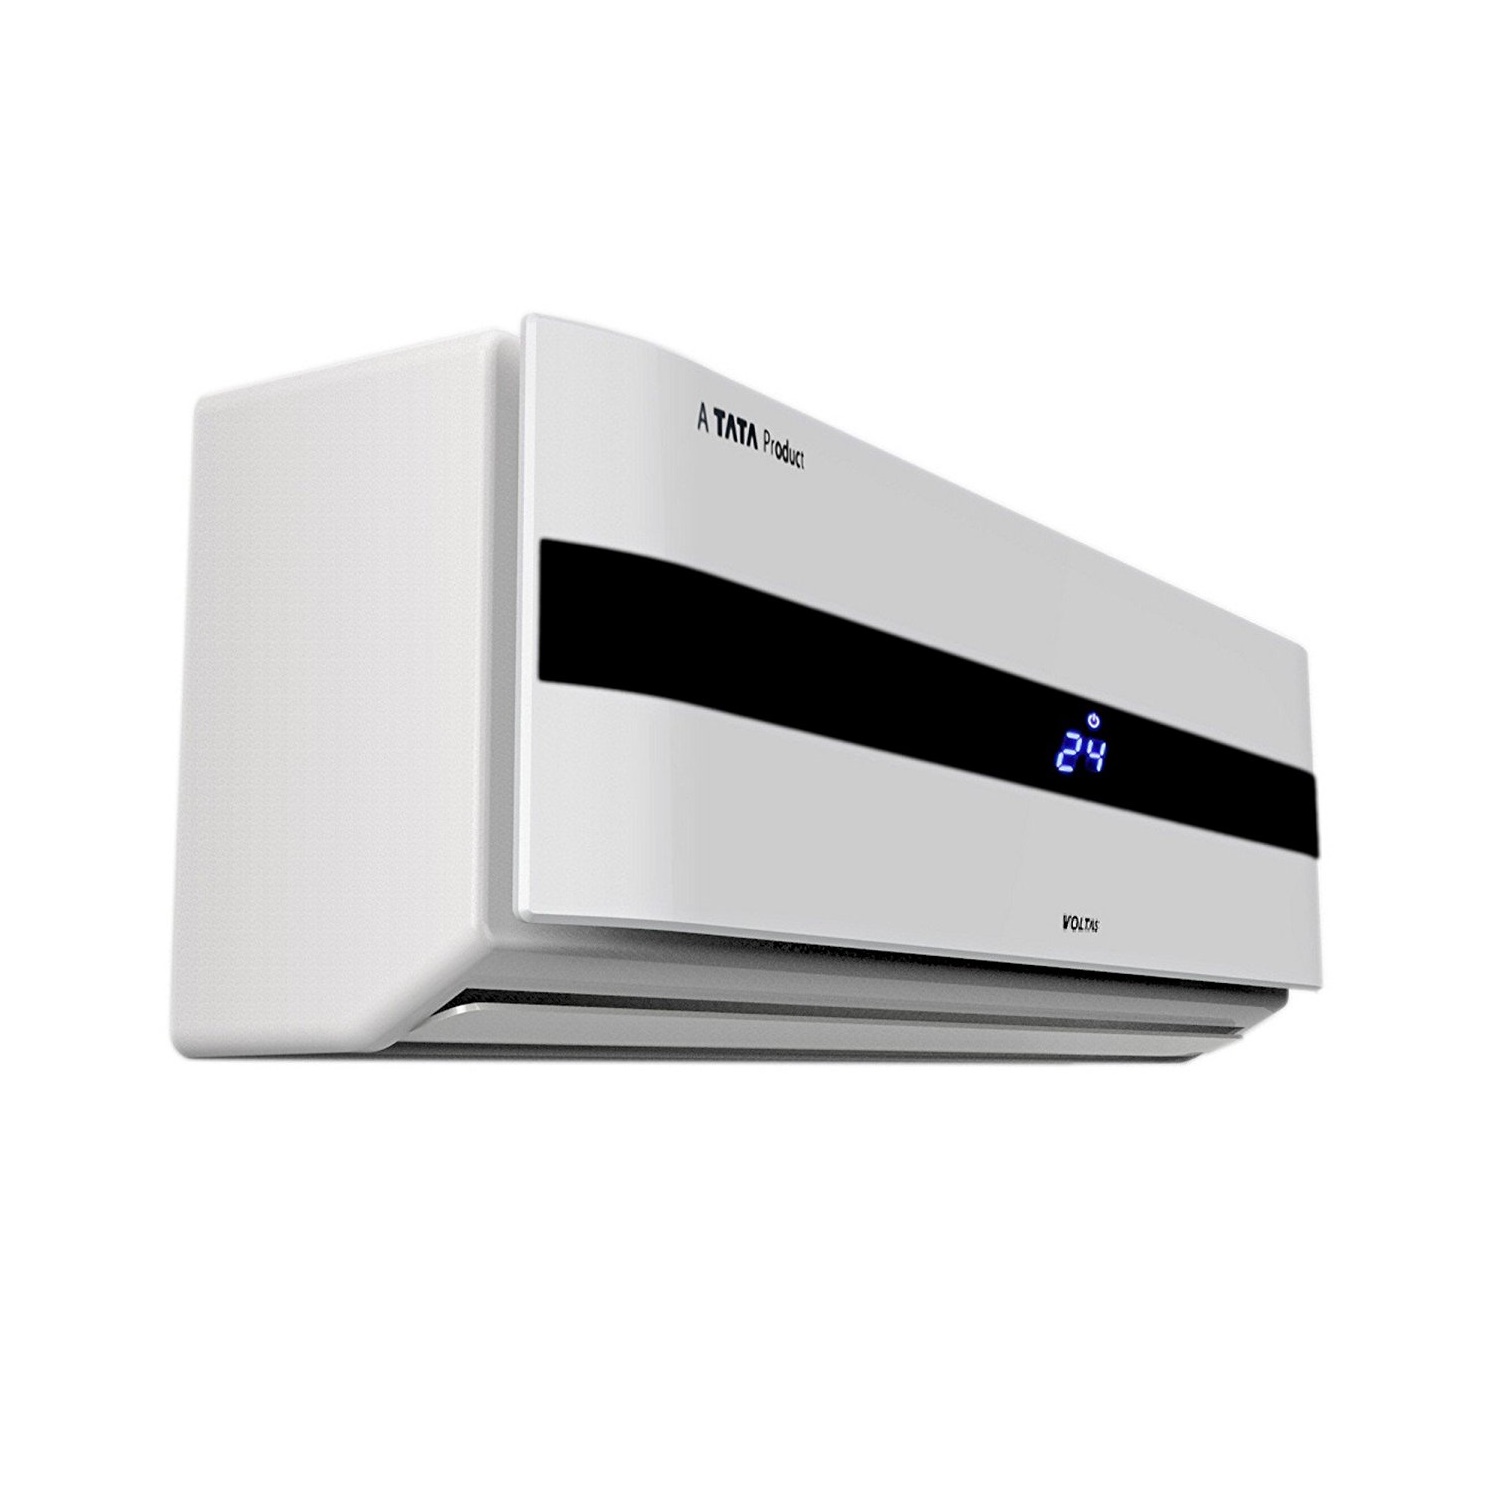 Voltas AC Price 2018, Latest Models, Specifications ...